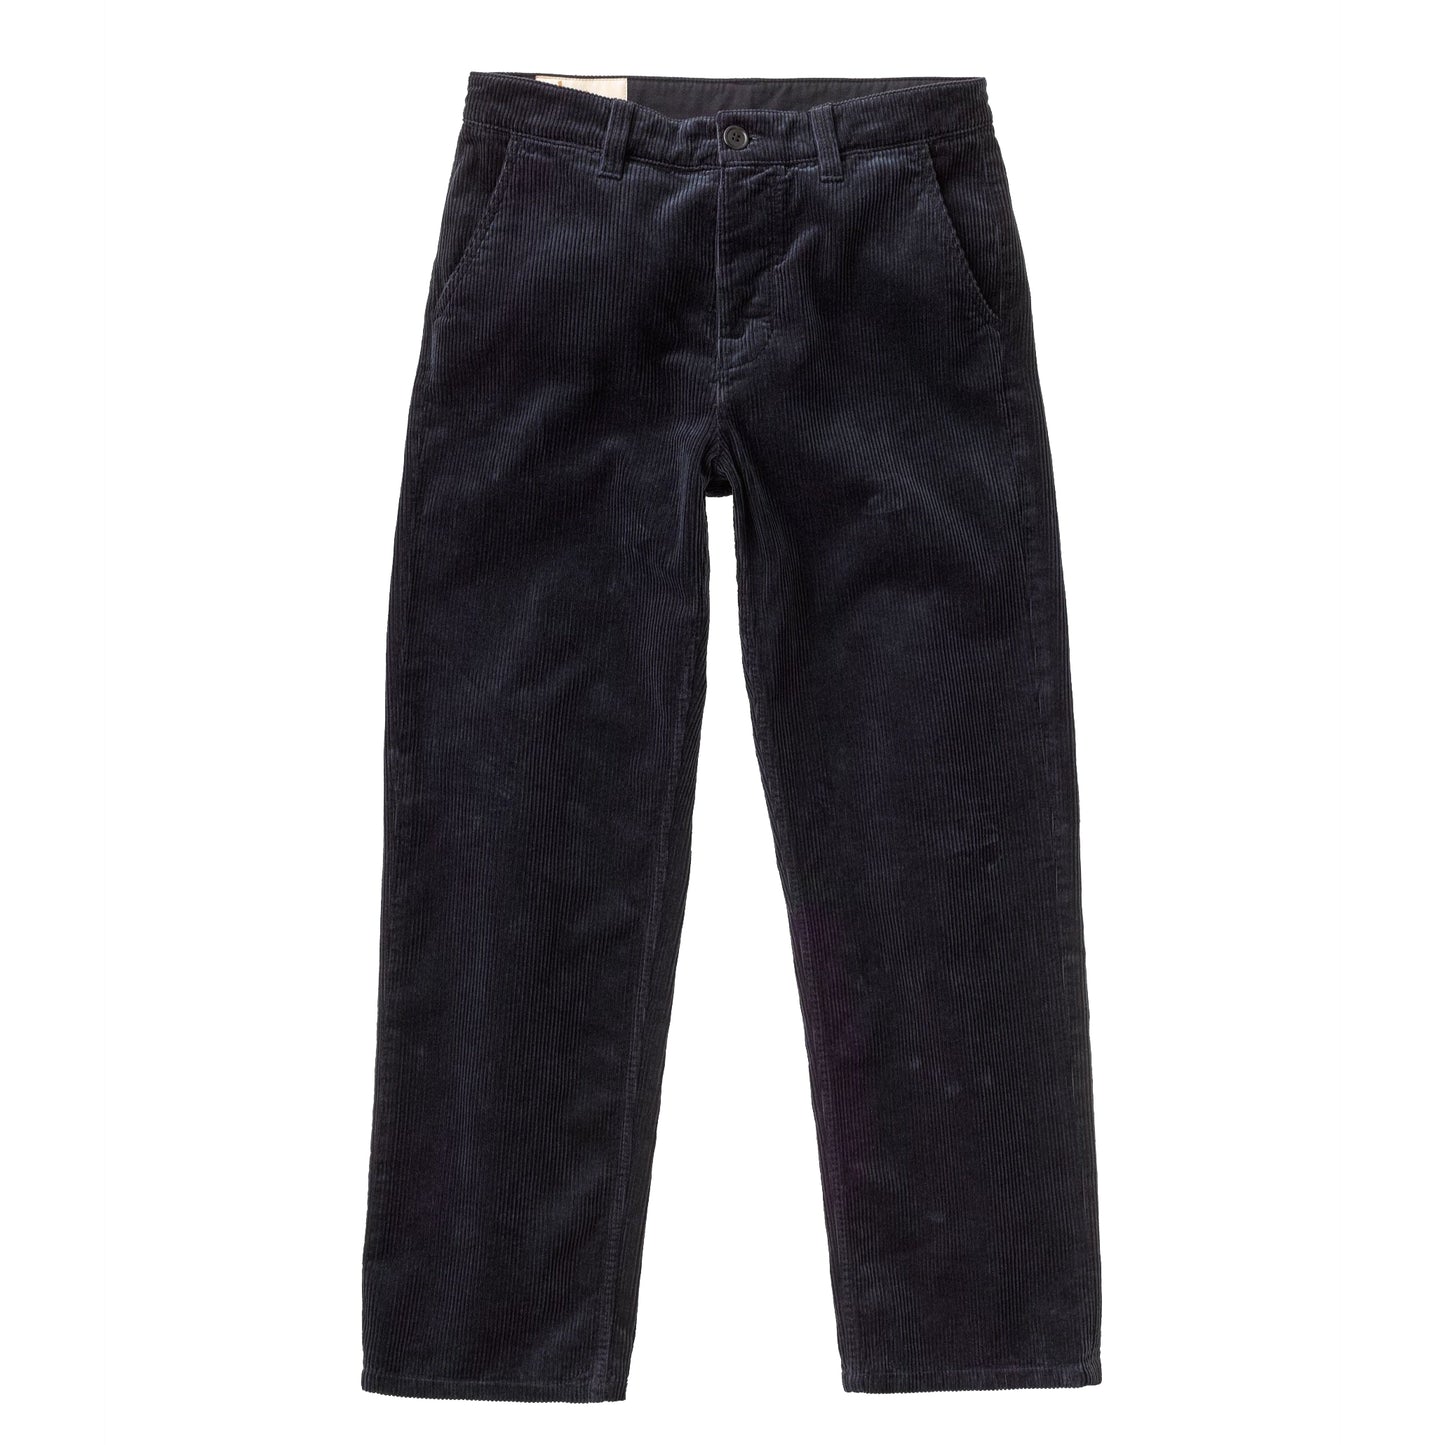 Nudie Jeans Co. Lazy Leo Cords